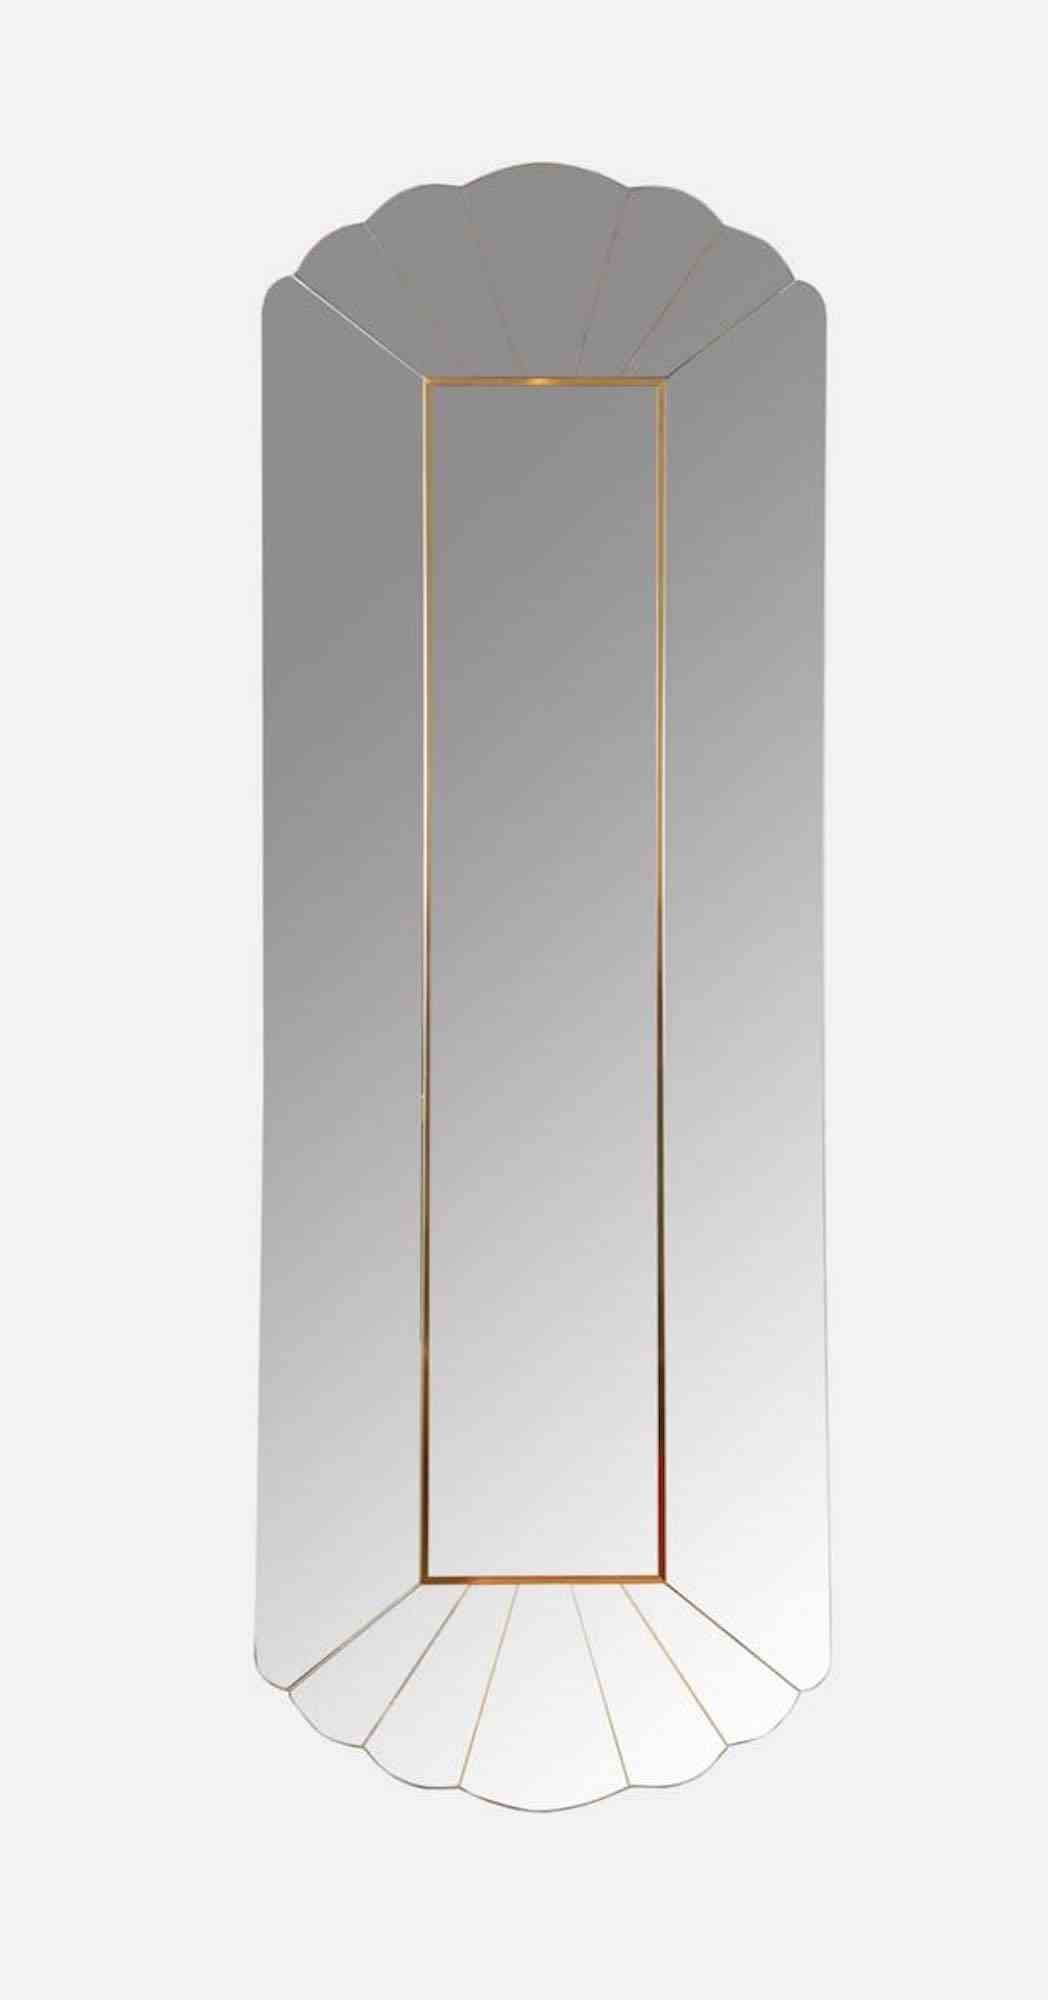 AD008 Mirror is a work realized by Alain Delon for Maison Jansen 1970s.

Brass profiles, brass plate with production logo and “Alain Delon” signature on the back.

H cm 155x55 (slight wear)

Produced and distributed in Italy by R.S.D. Furniture